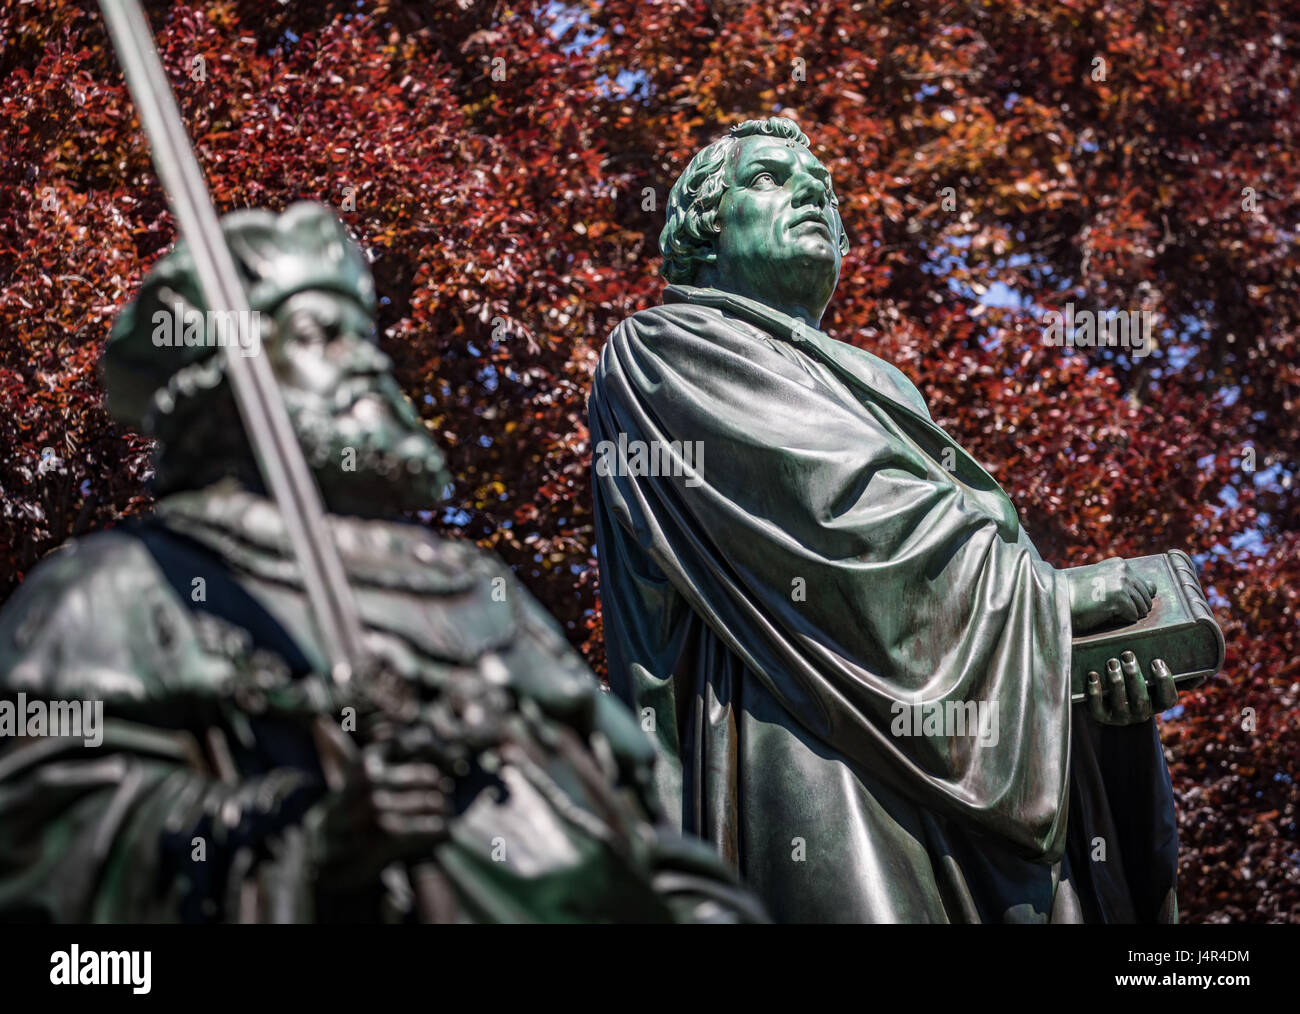 Worms, Germany. 9th May, 2017. A giant statue of Martin Luther, the center of the Luther memorial from 1868, can be seen behind a statue of Frederick I of Prussia (l) in Worms, Germany, 9 May 2017. One of the highlights of the celebration of the 500th anniversary of the Reformation is the opening of the Luther Way ('Lutherweg') 1521 between Eisenach and Worms on Sunday, 14 May 2017. The roughly 400 kilometer long pilgrimage path is said to attract hikers and tourists. Photo: Frank Rumpenhorst/dpa/Alamy Live News Stock Photo